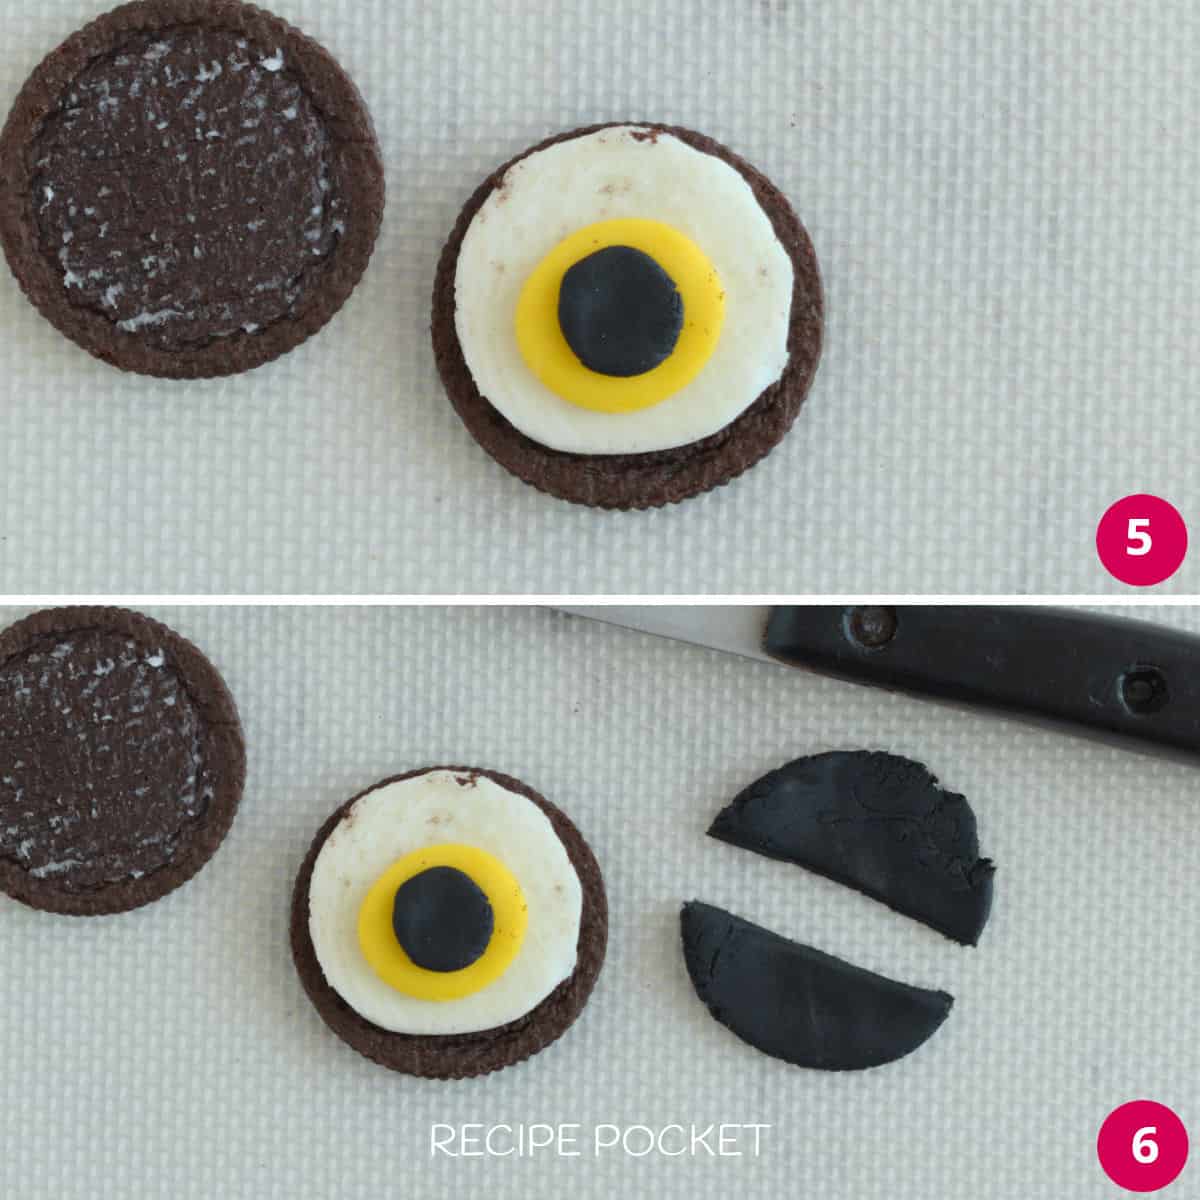 Image showing a half made eyeball cookie.